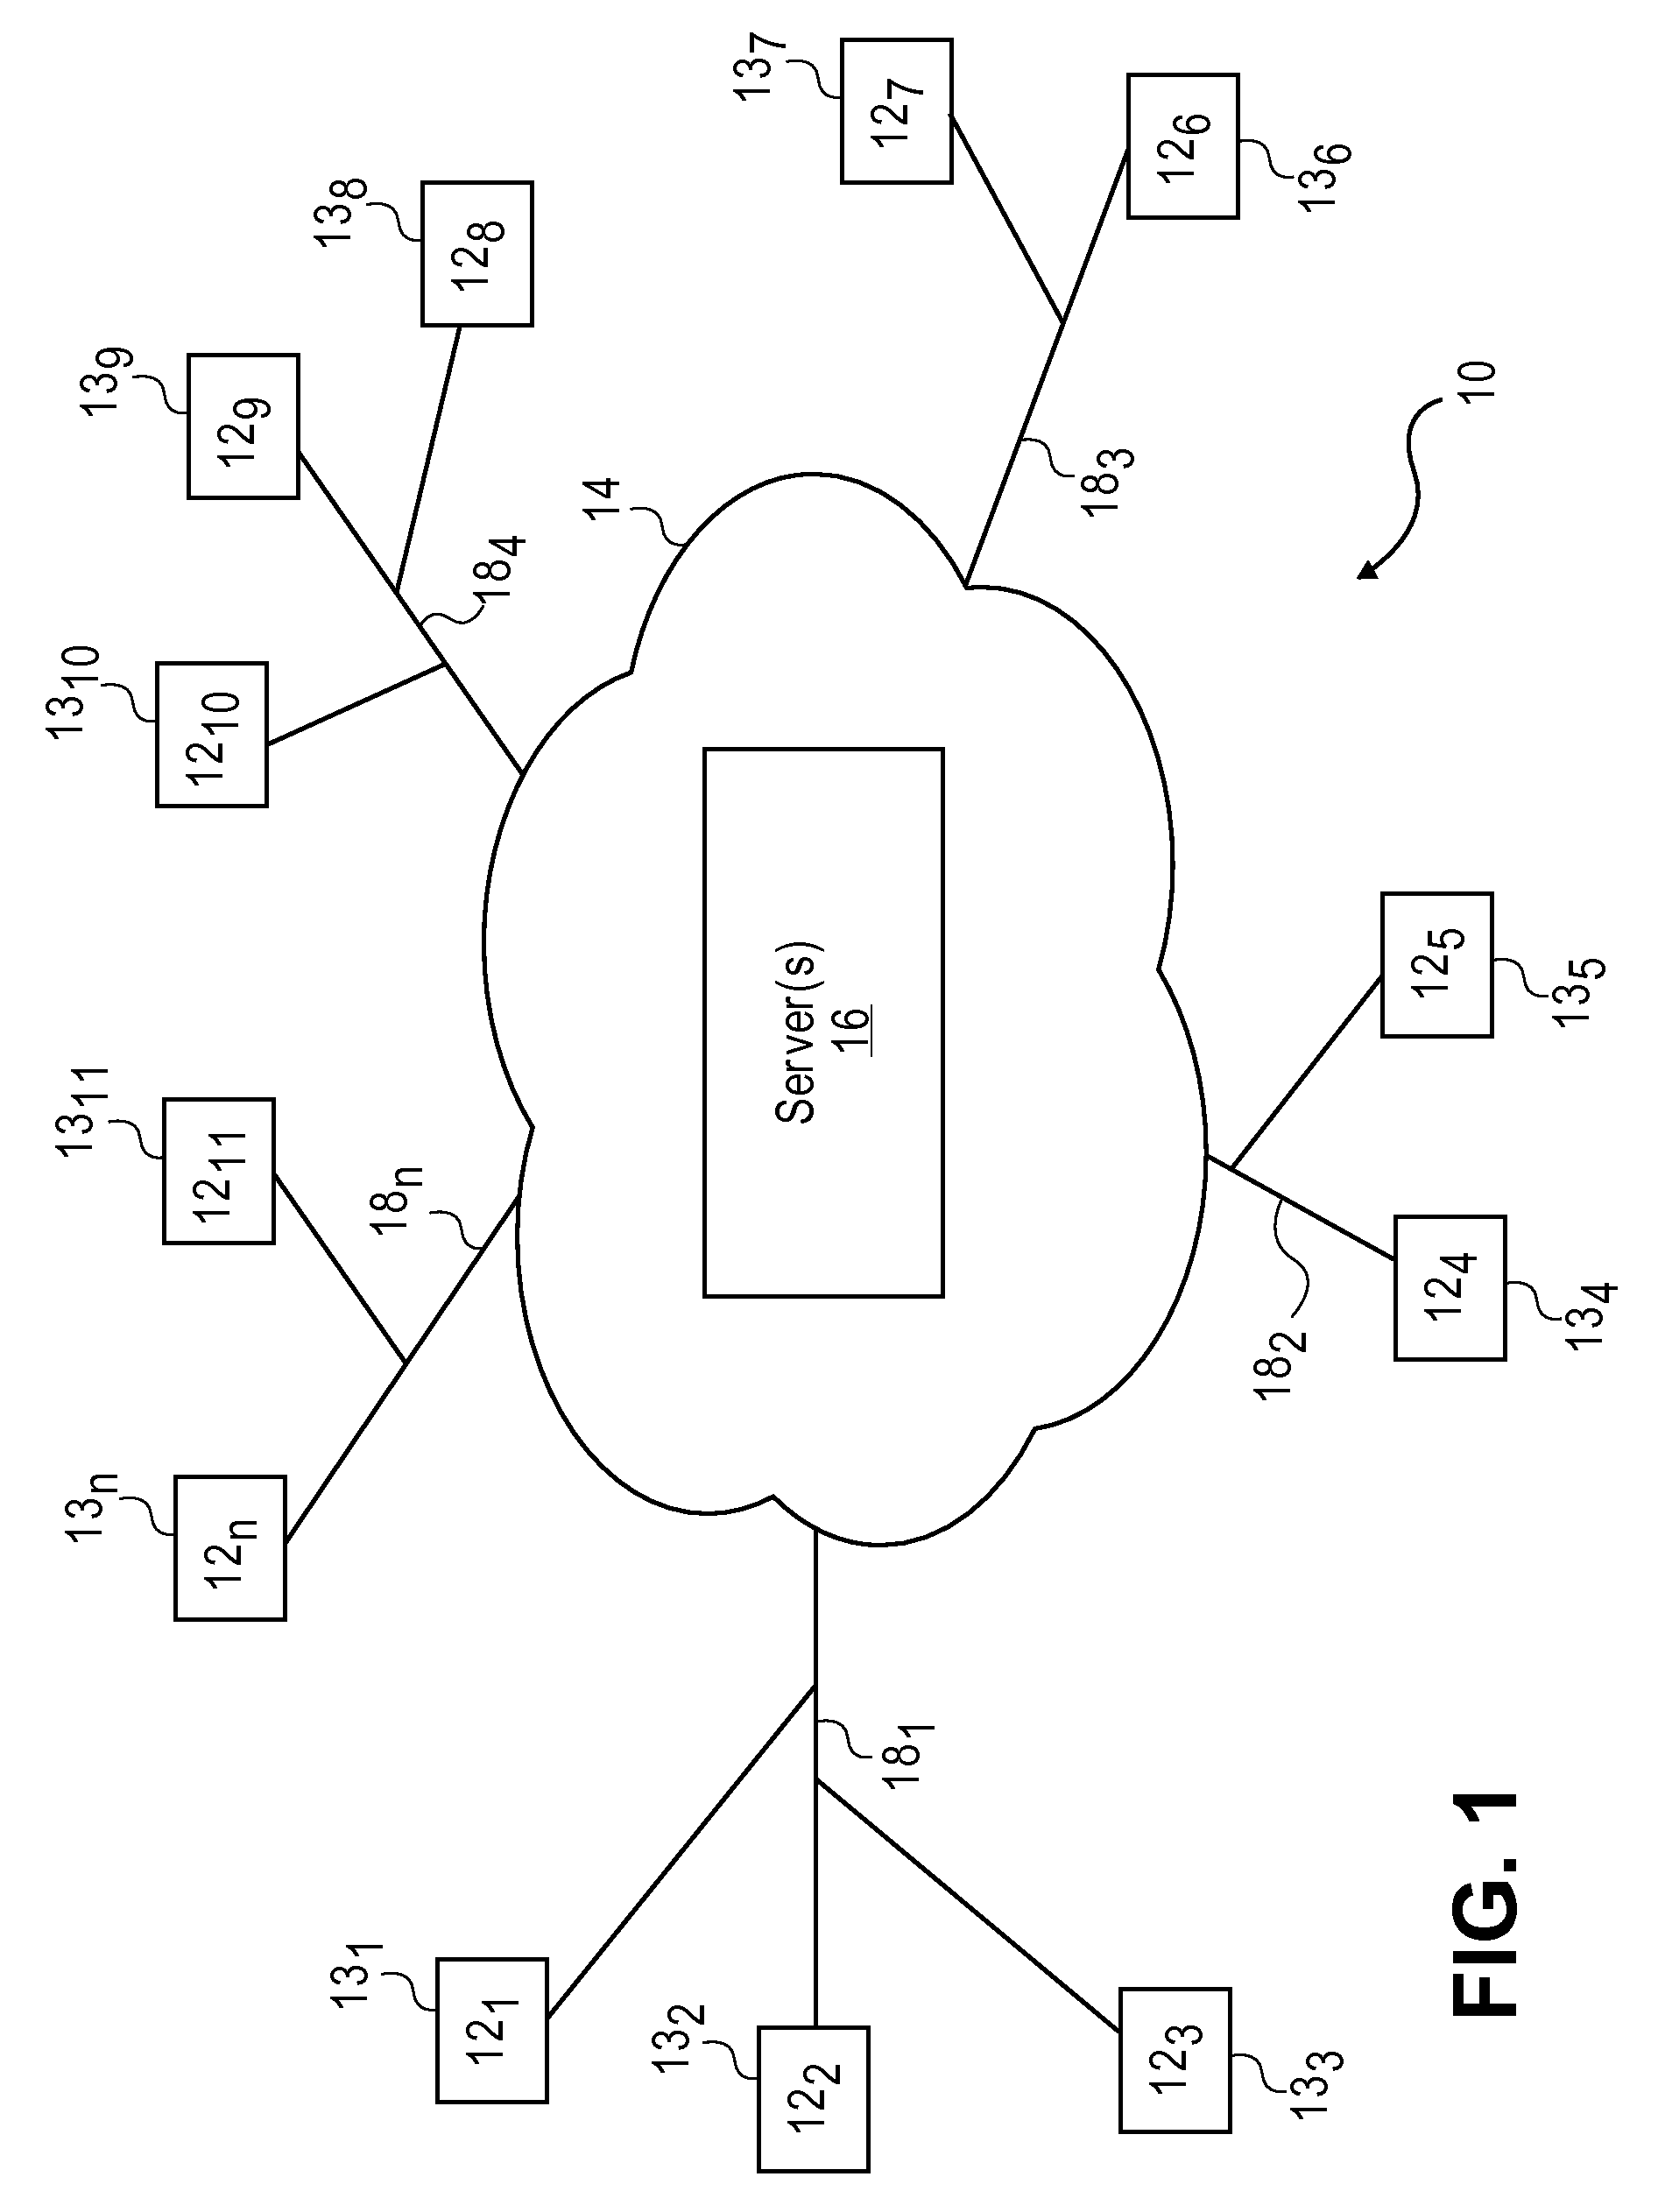 Telecommunication and multimedia management method and apparatus